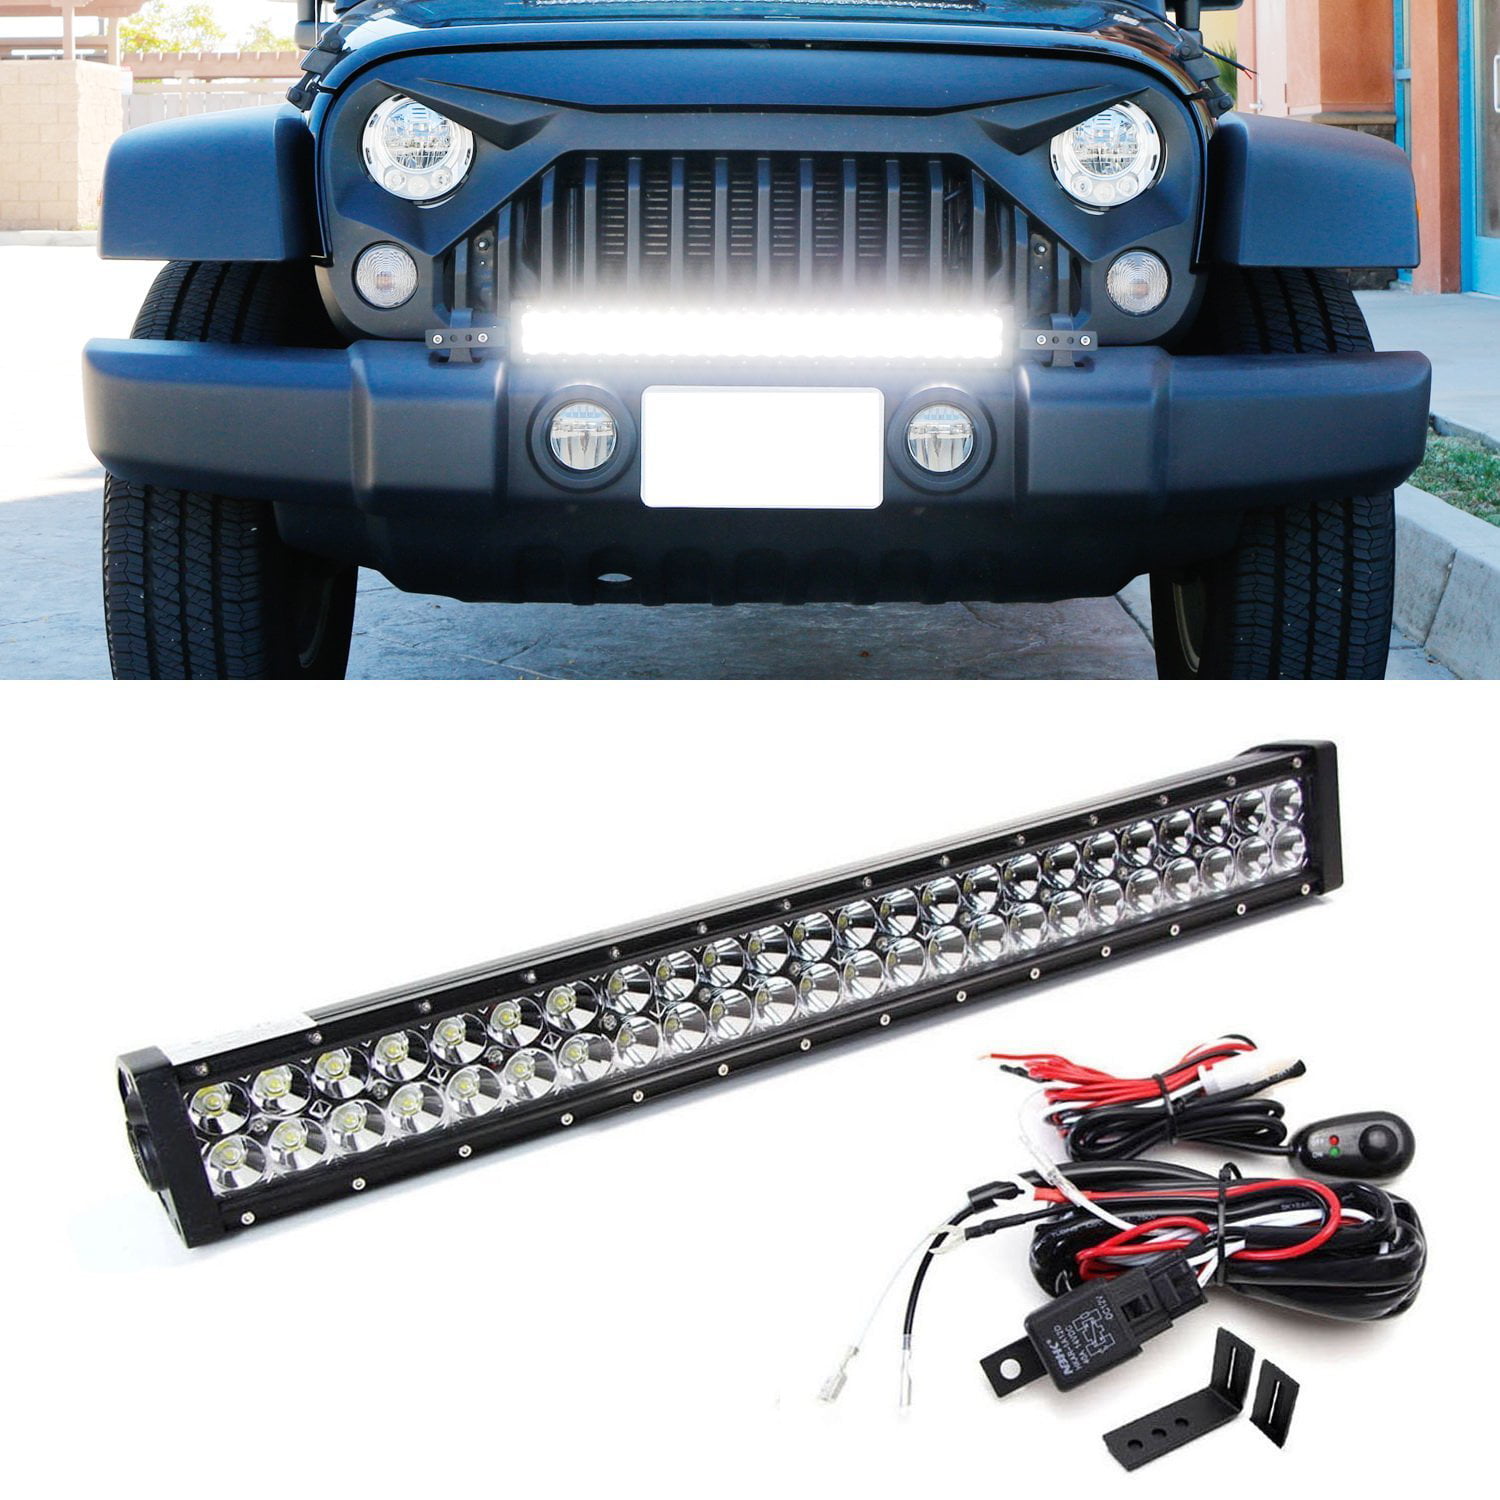 Post mount spotlight 100W Halogen 6 inch 2007 Jeep WRANGLER UNLIMITED 4DR -Chrome Driver side WITH install kit 